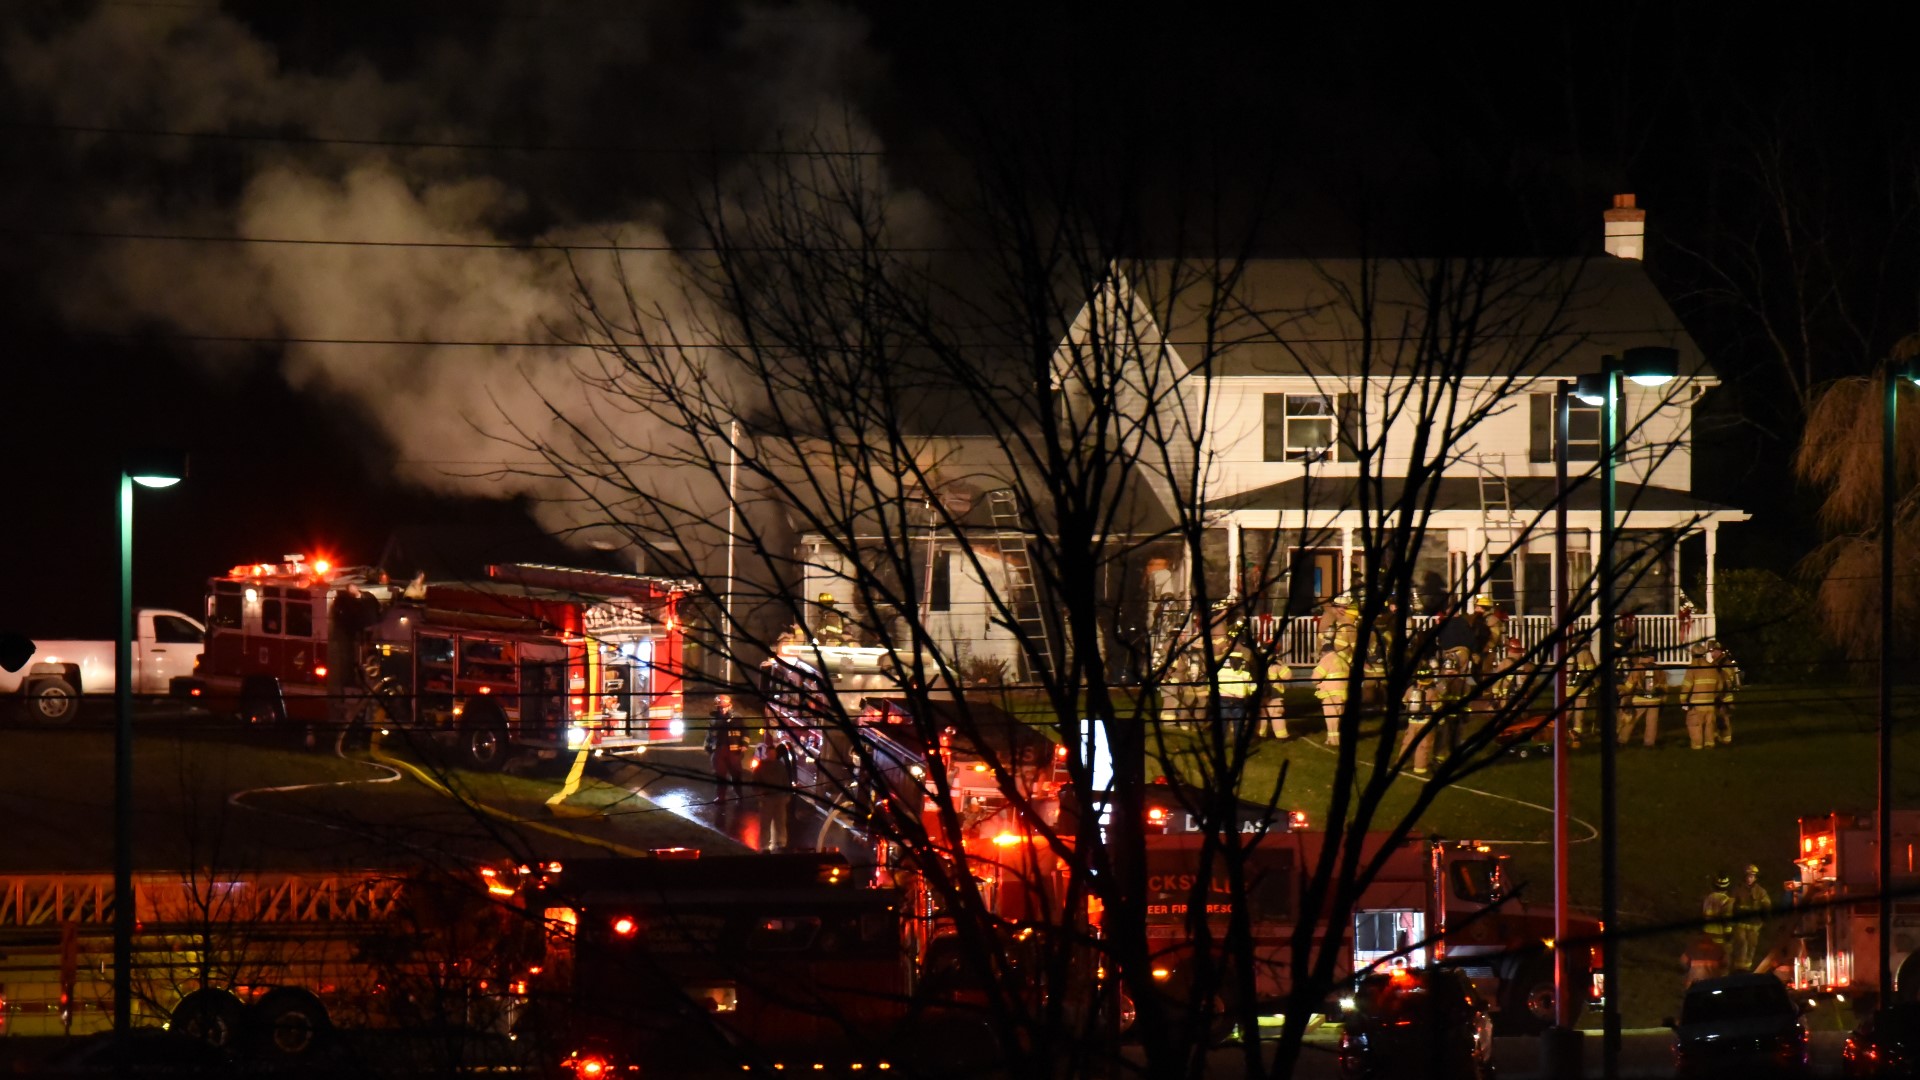 The fire started just before 10 p.m. Tuesday night.